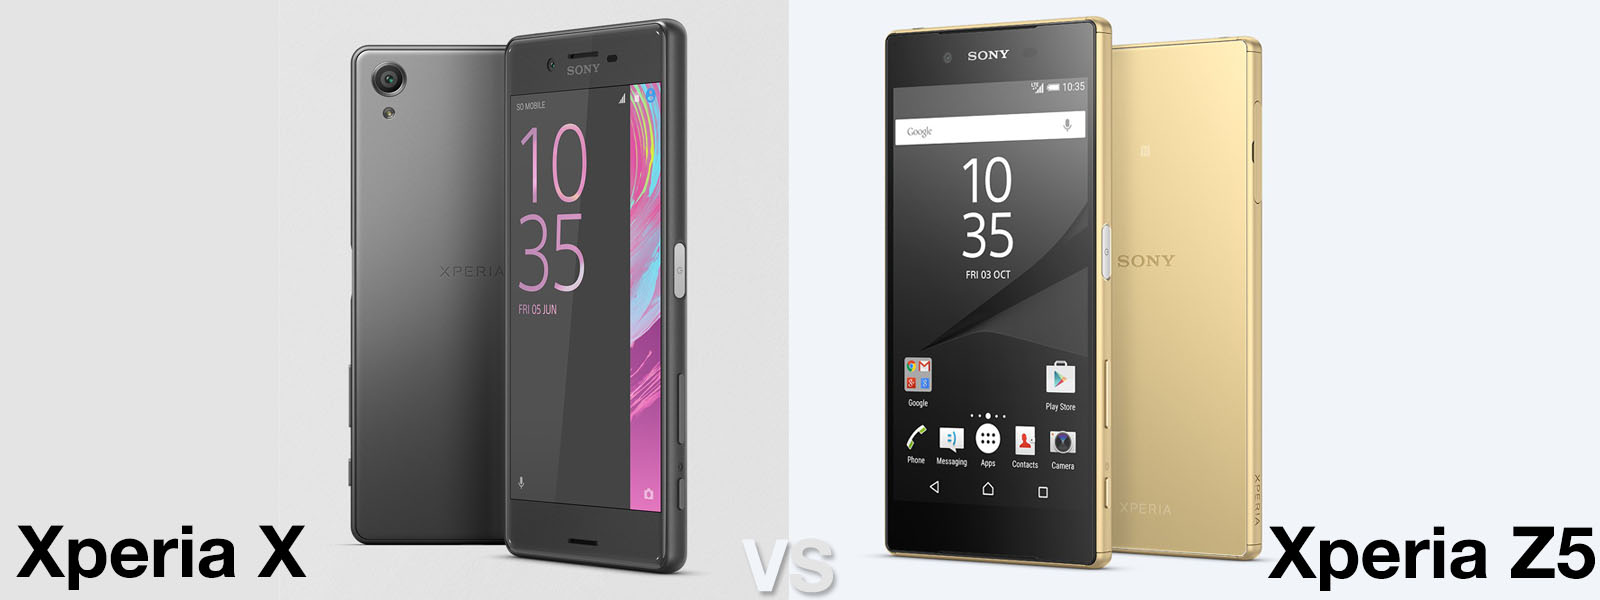 Sony Xperia X vs Xperia Z5: What's the difference?